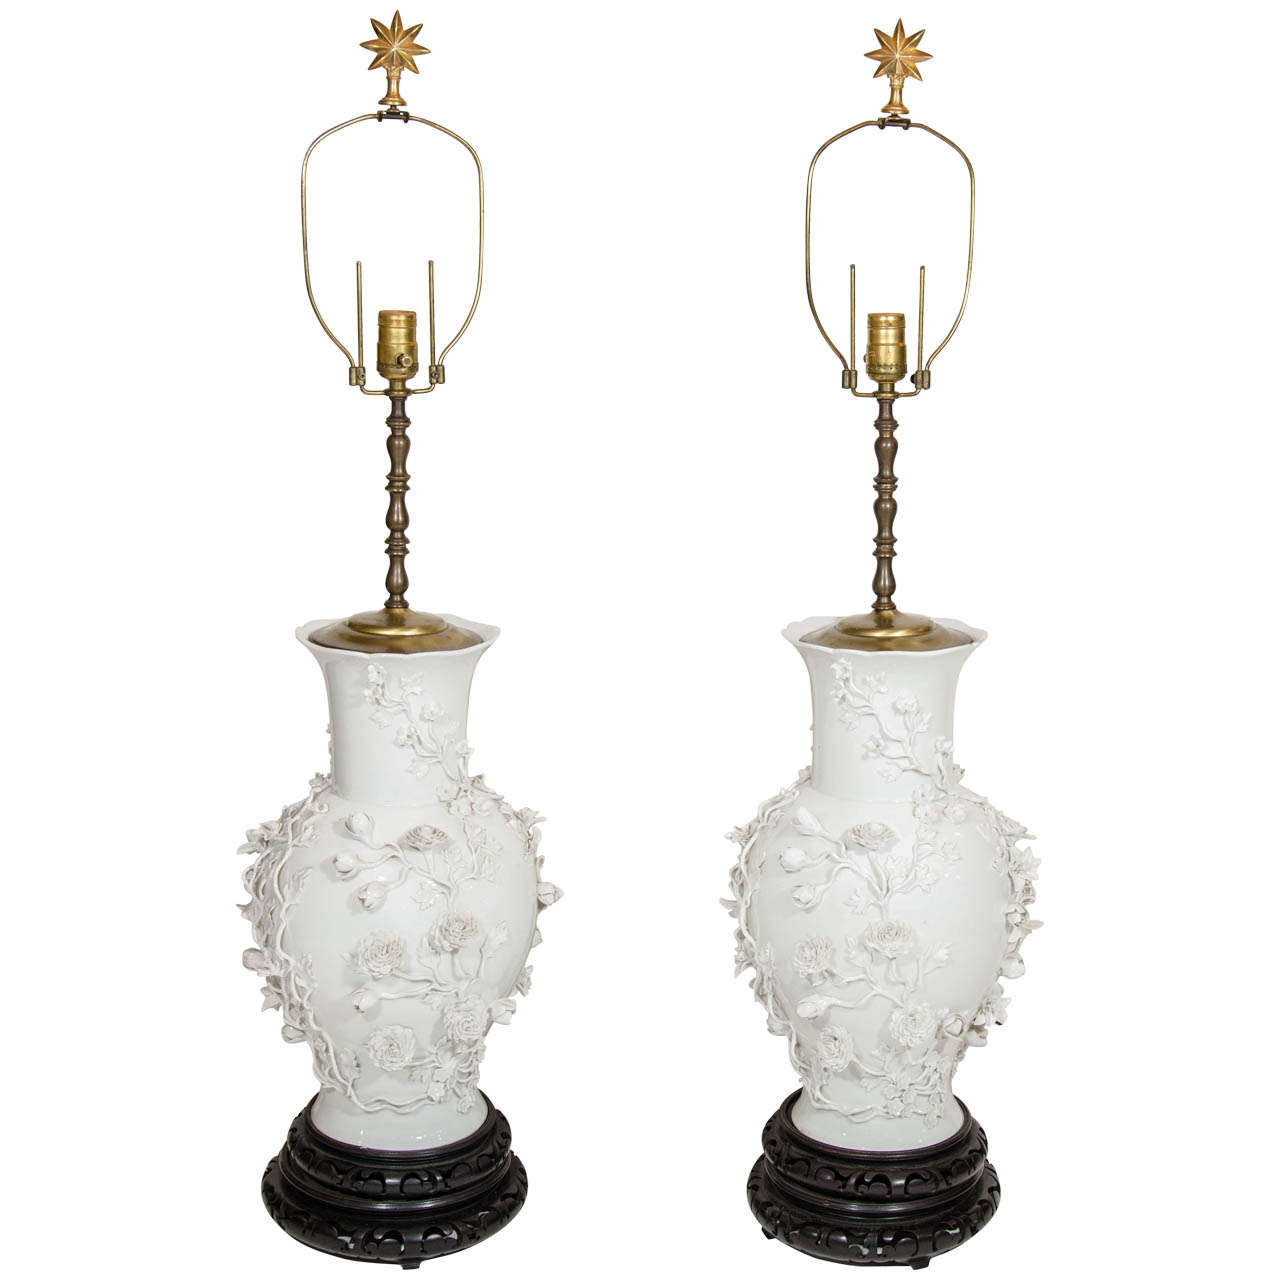 A Pair of Exquisite & Large Antique Louis XVI Chinoiserie style Chinese Blanc De Chine Porcelain lamps, 19th century For Sale